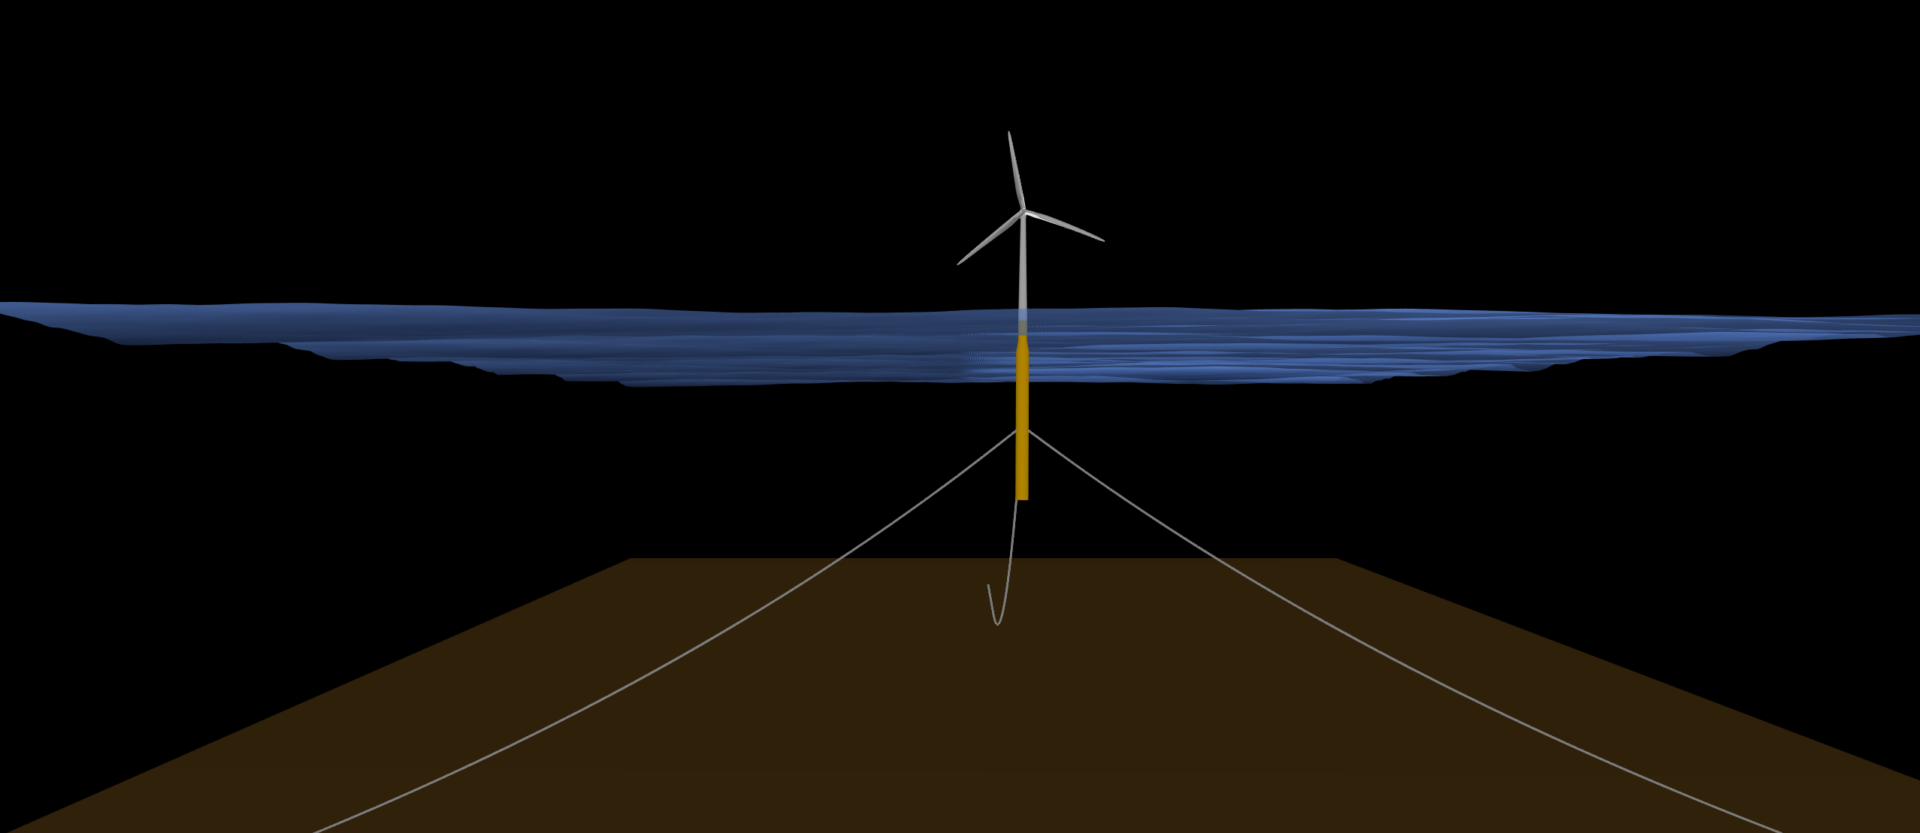 this image shows a simulation of the OC3 sparbuoy offshore floating wind turbine